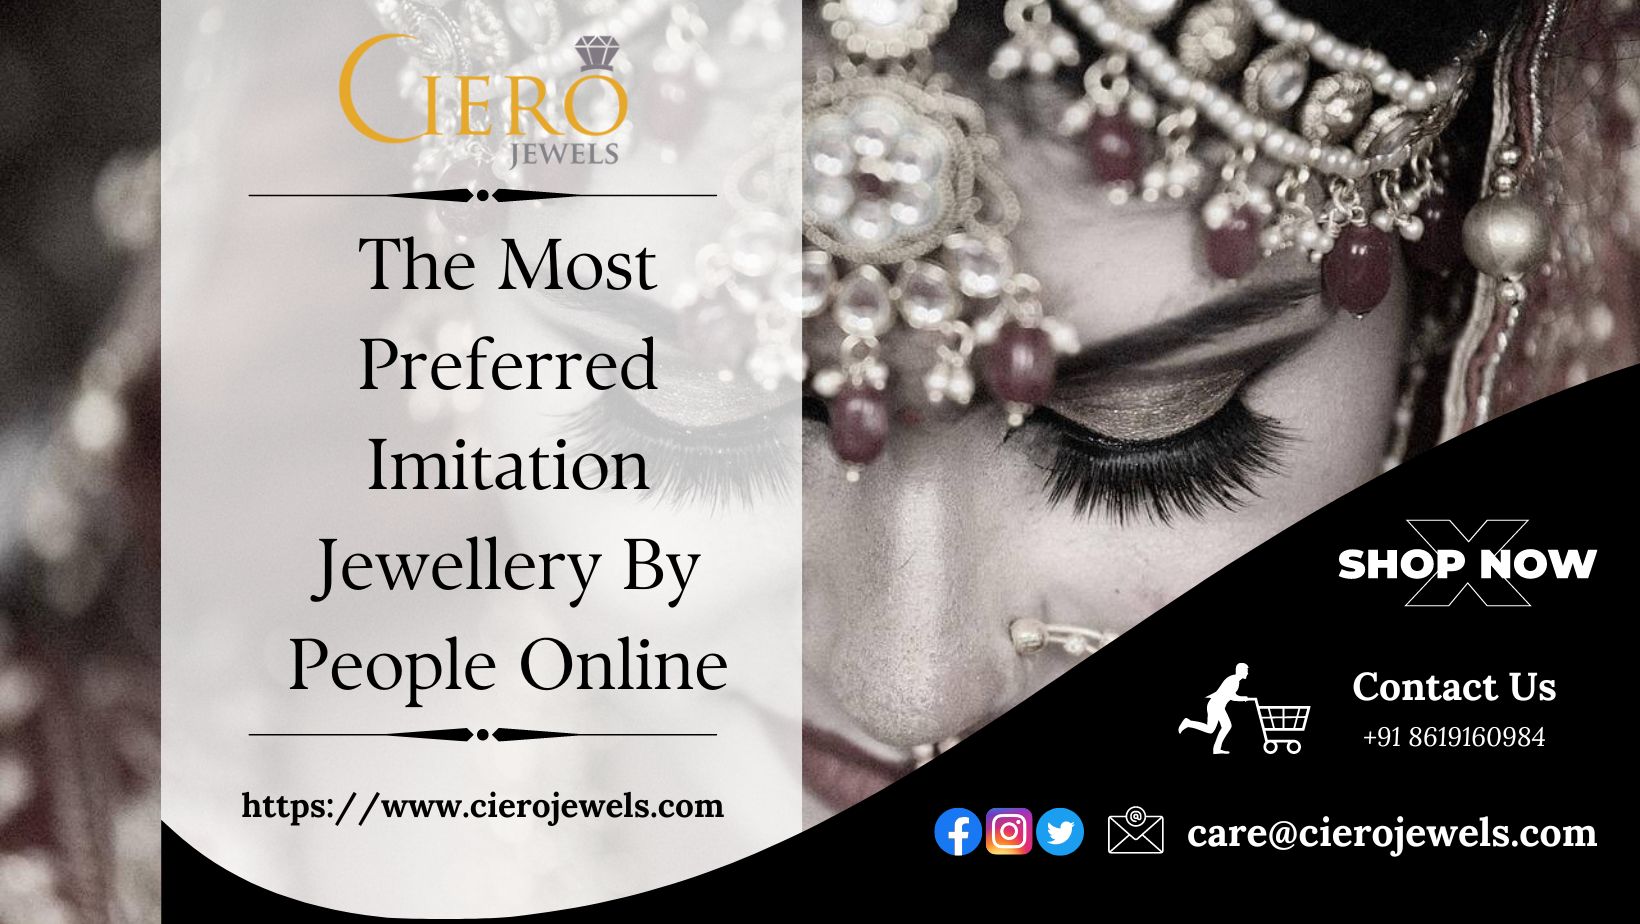 The Most Preferred Imitation Jewellery By People Online